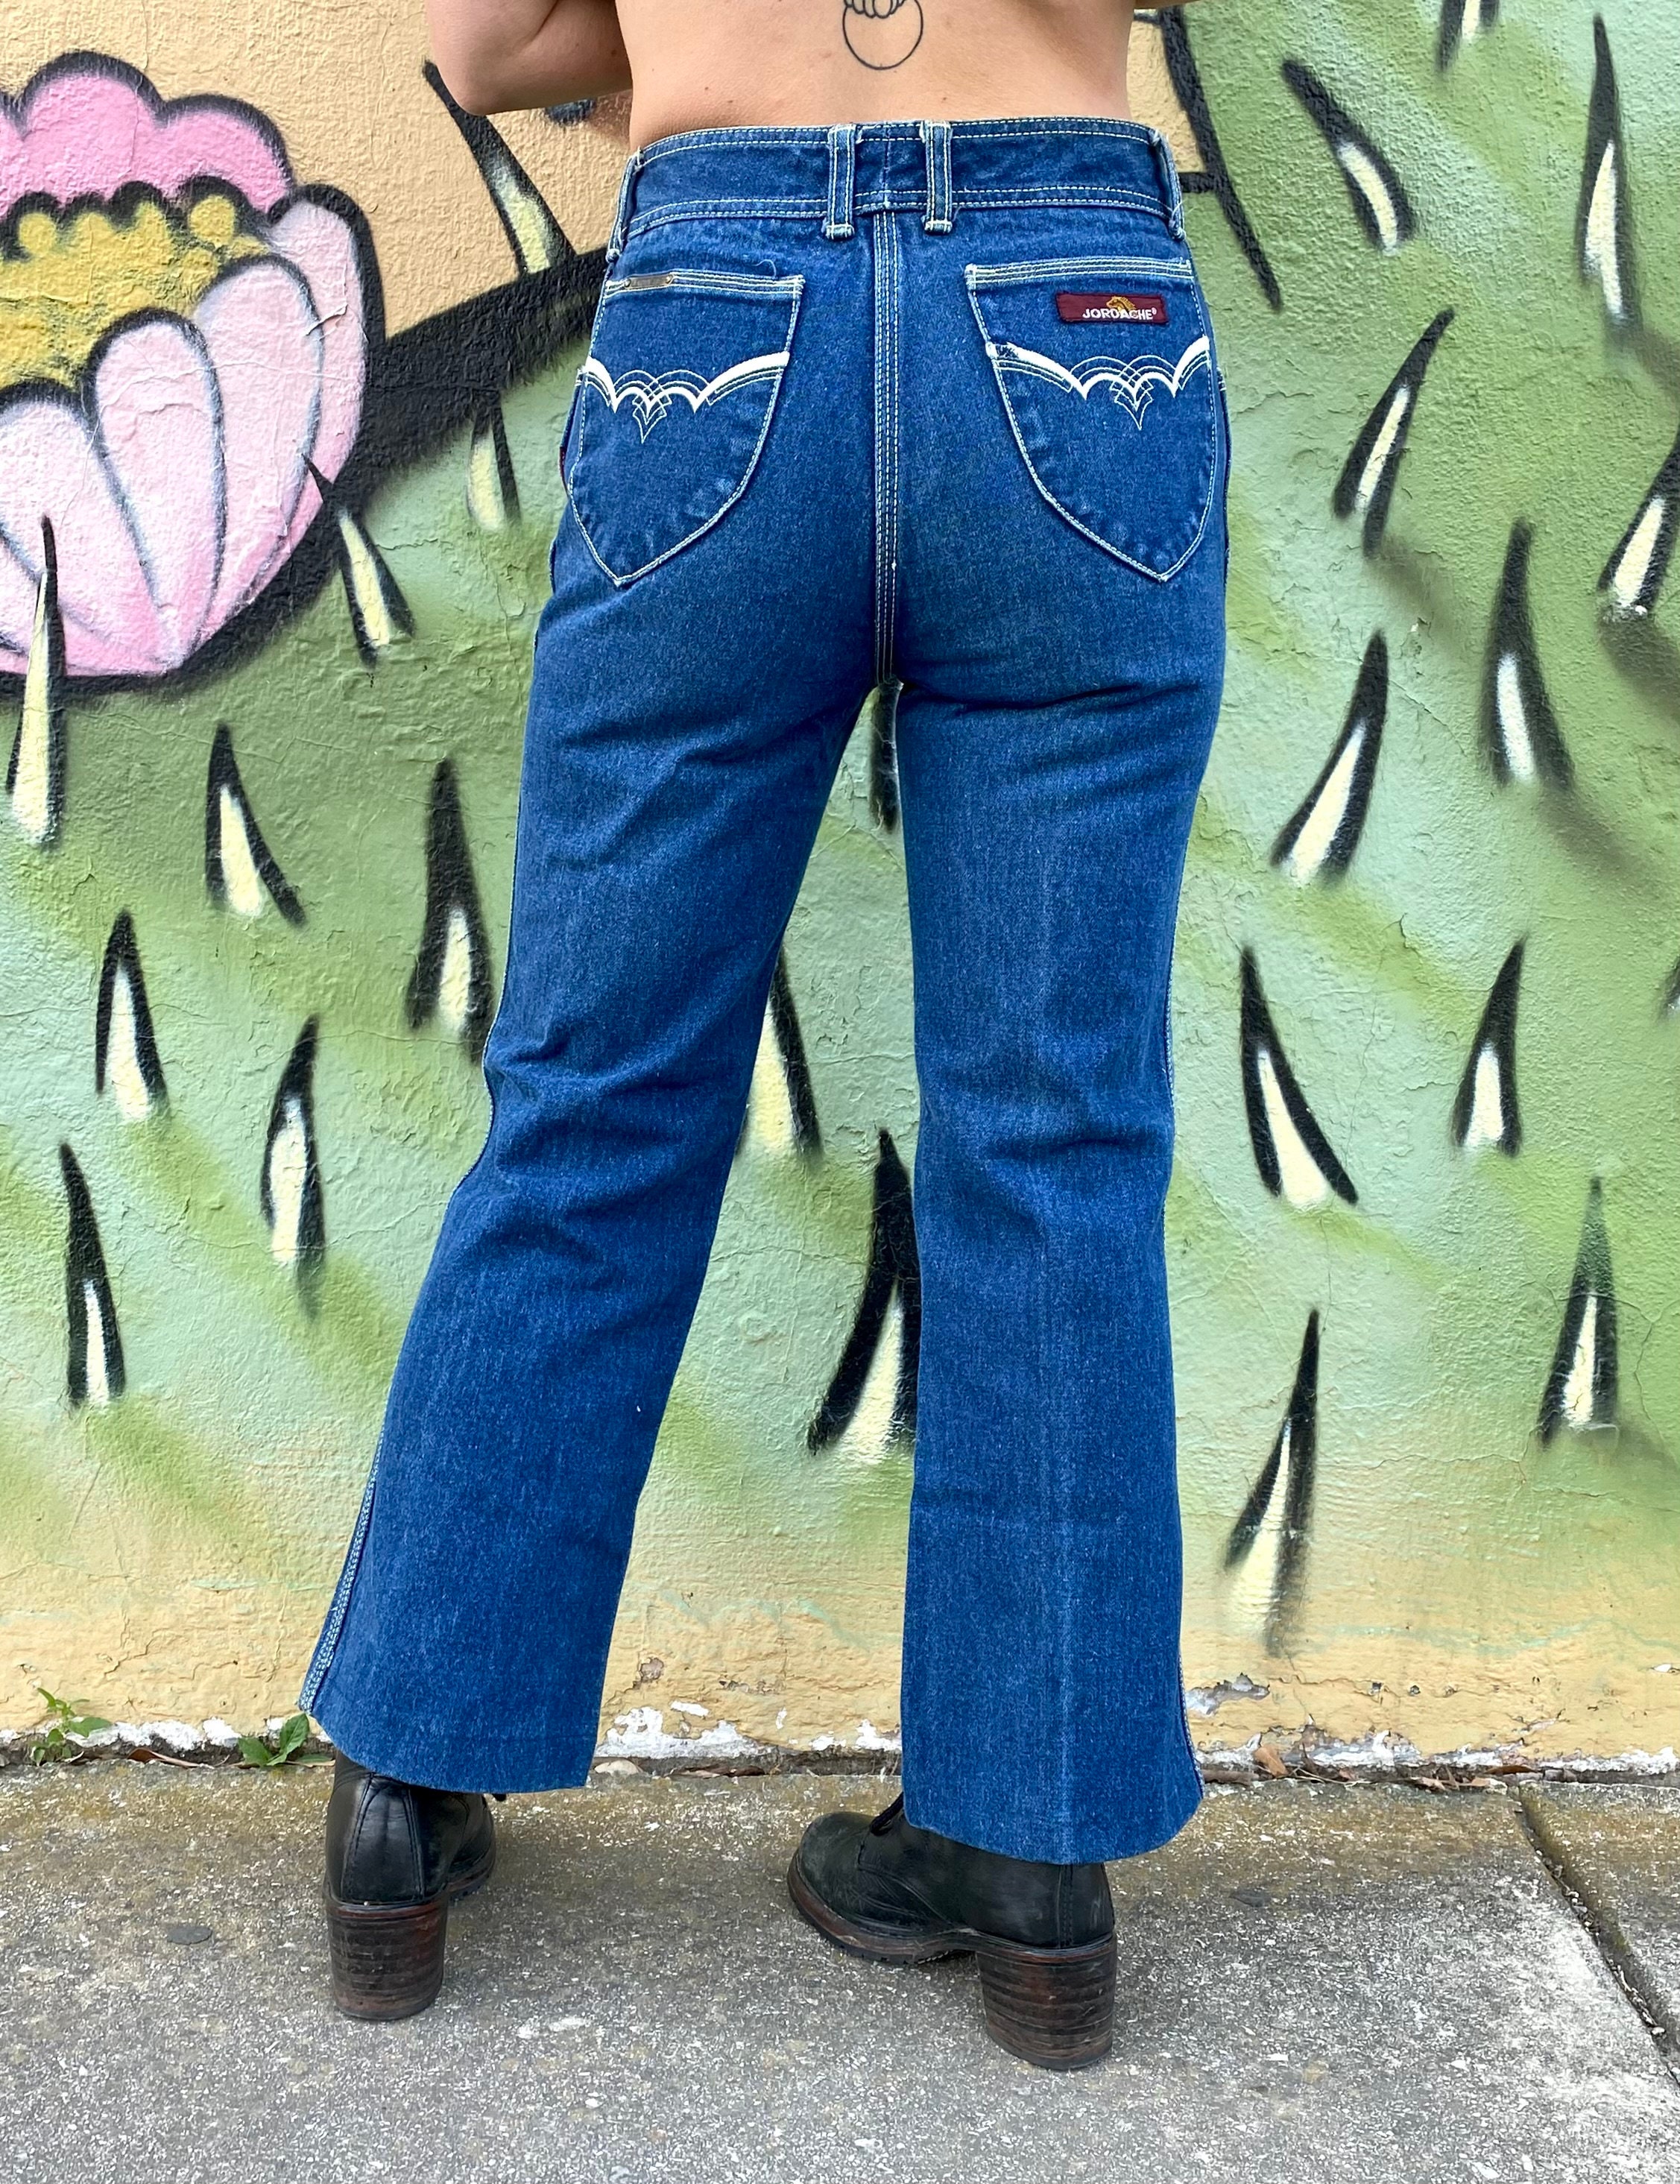 Vintage Jordache Jeans 90s Skinny Jeans Ankle Zipper High Waisted